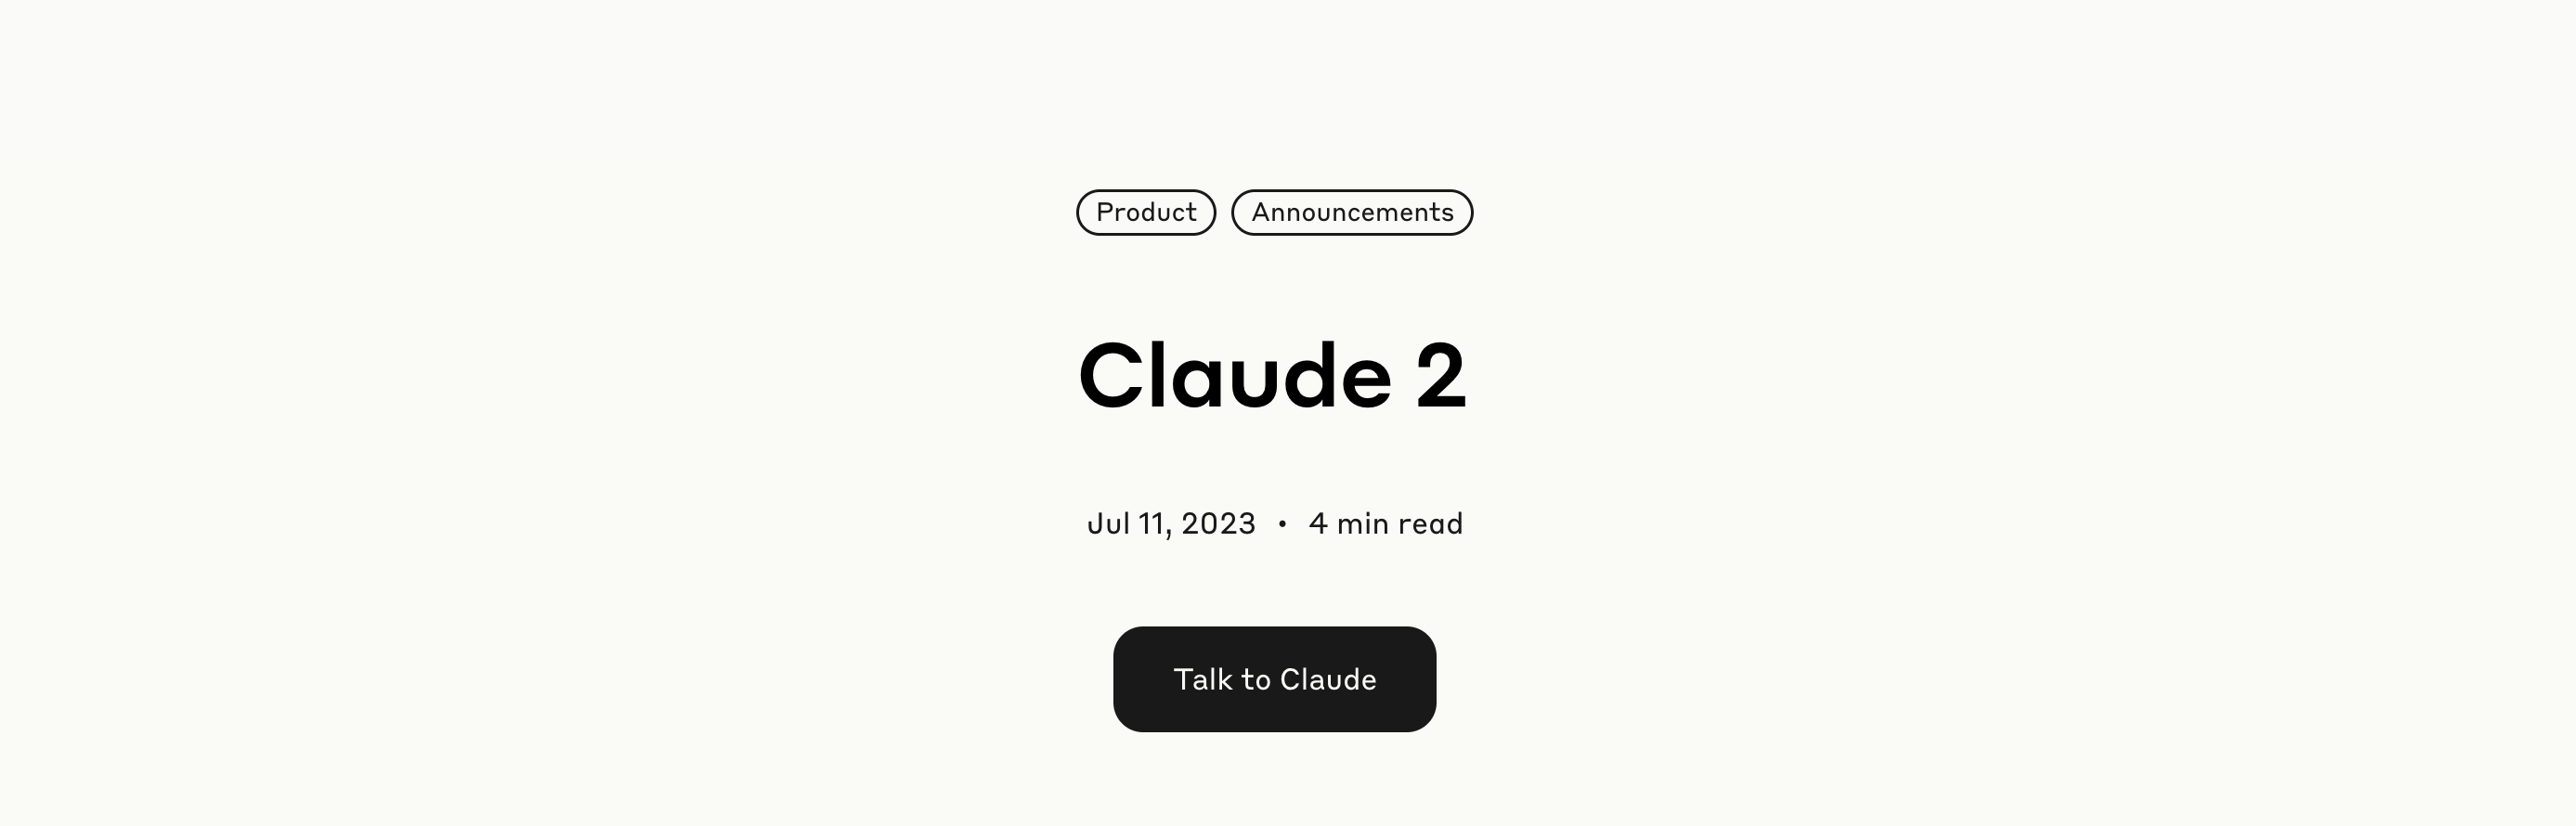 how to access the claude 2